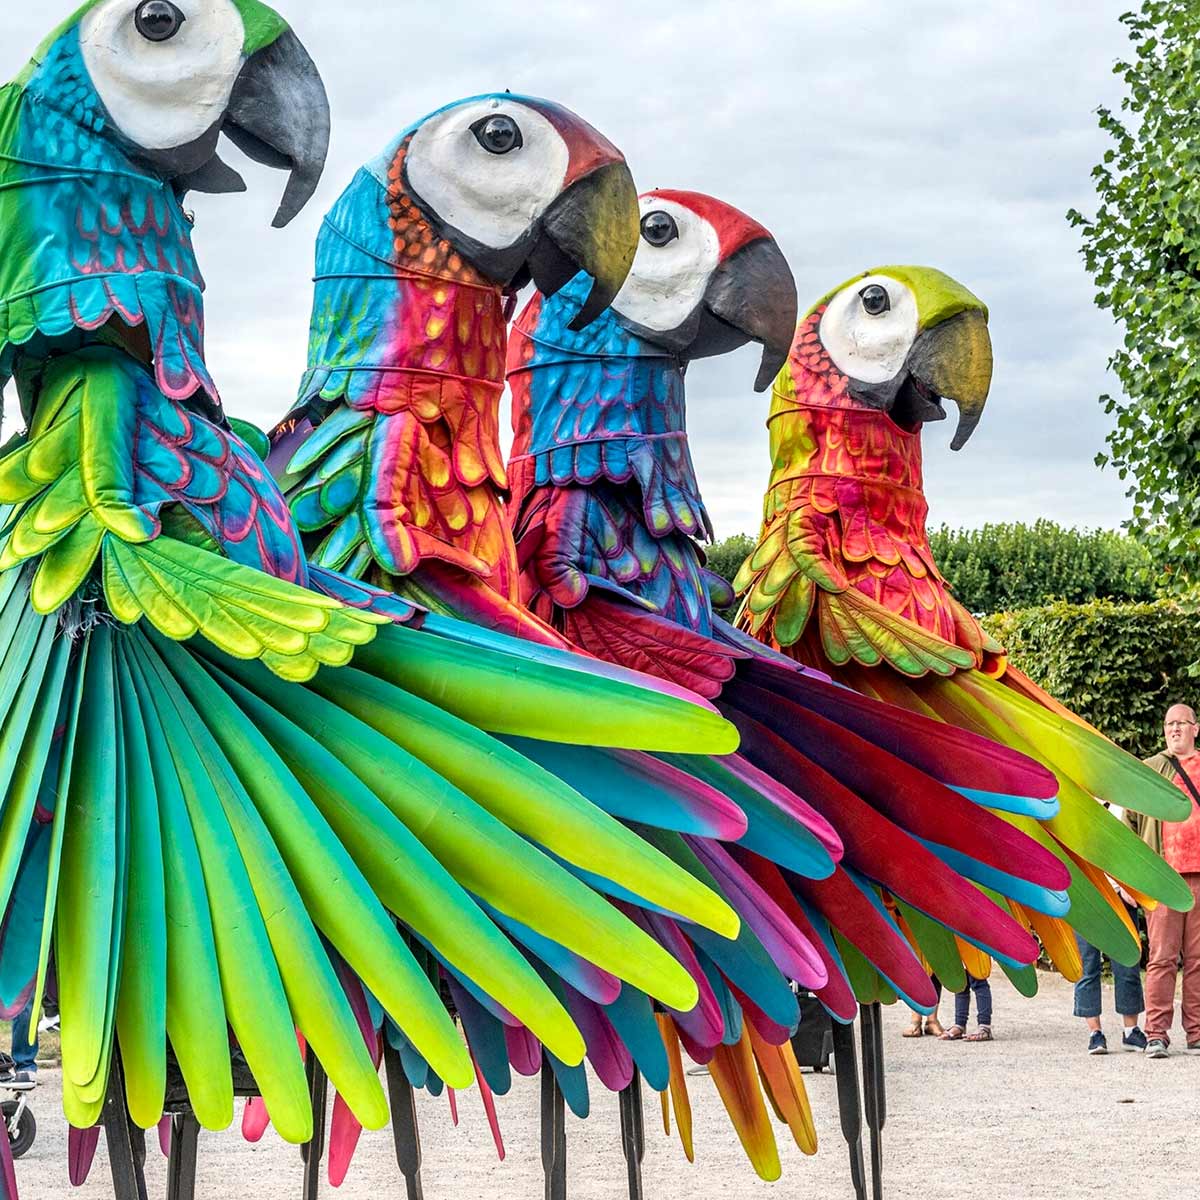 What Are These Giant Parrots Doing?